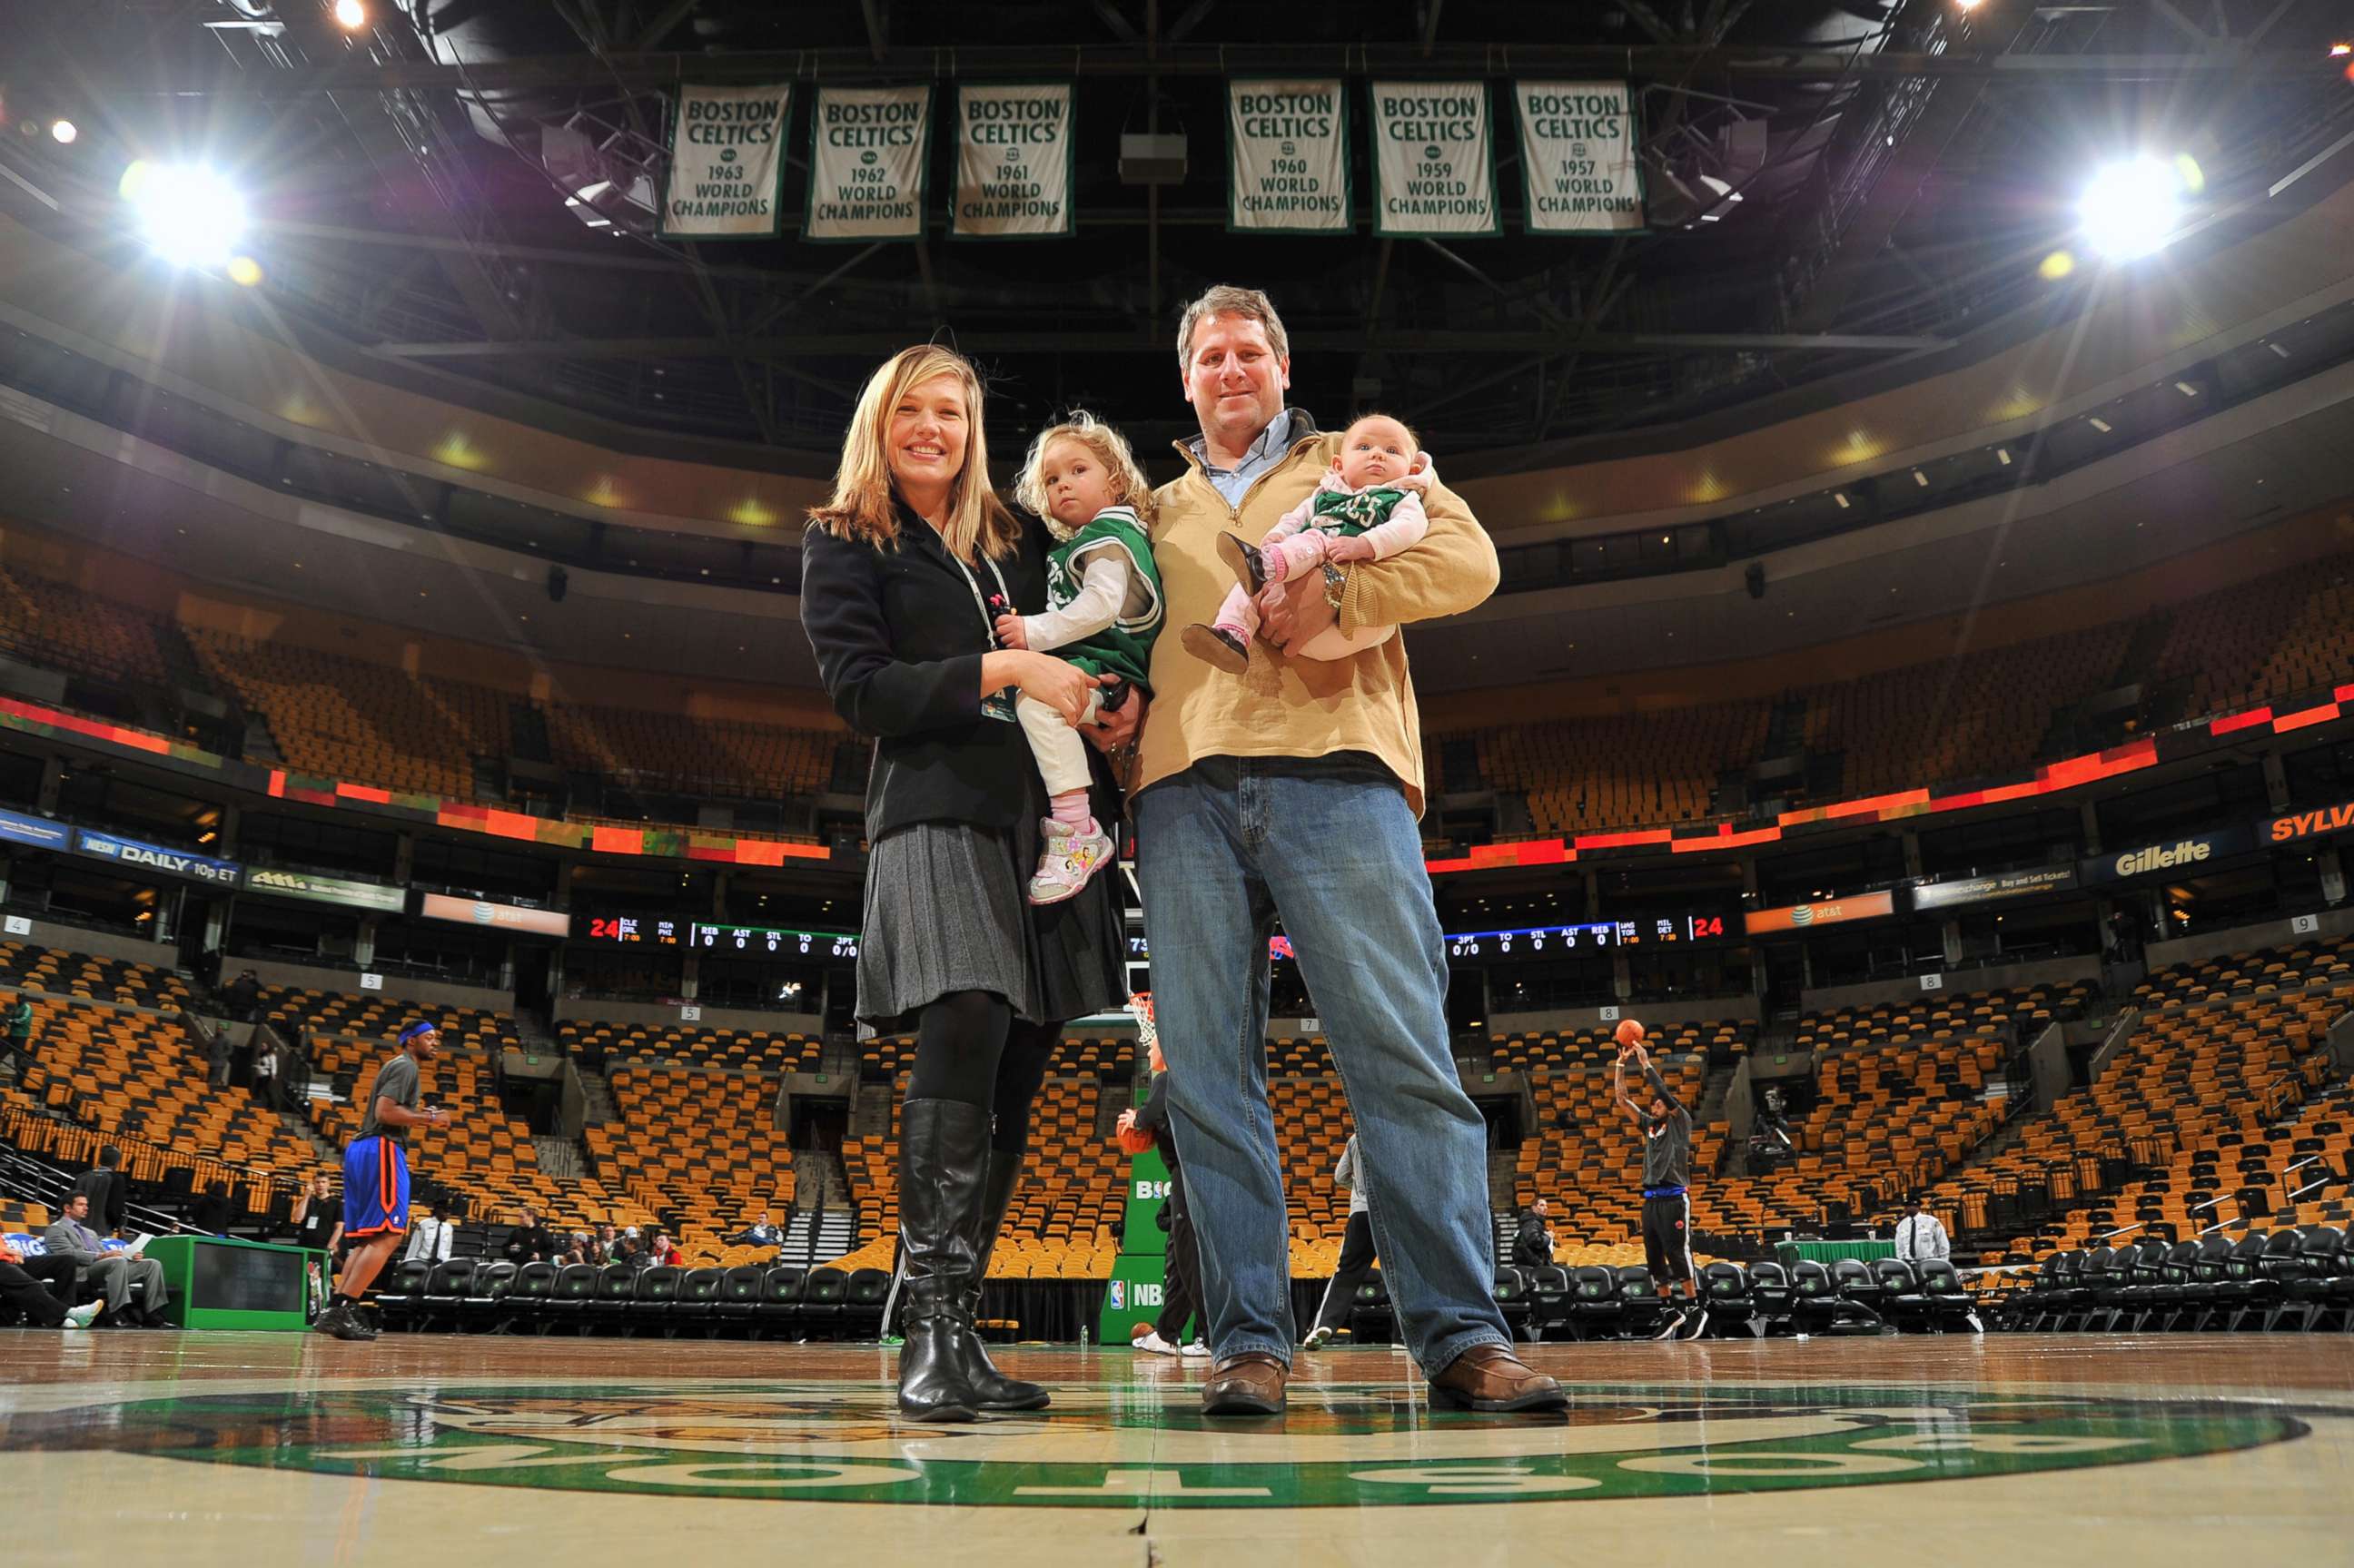 PHOTO: Heather Walker and her family inside the TD Garden in Boston.